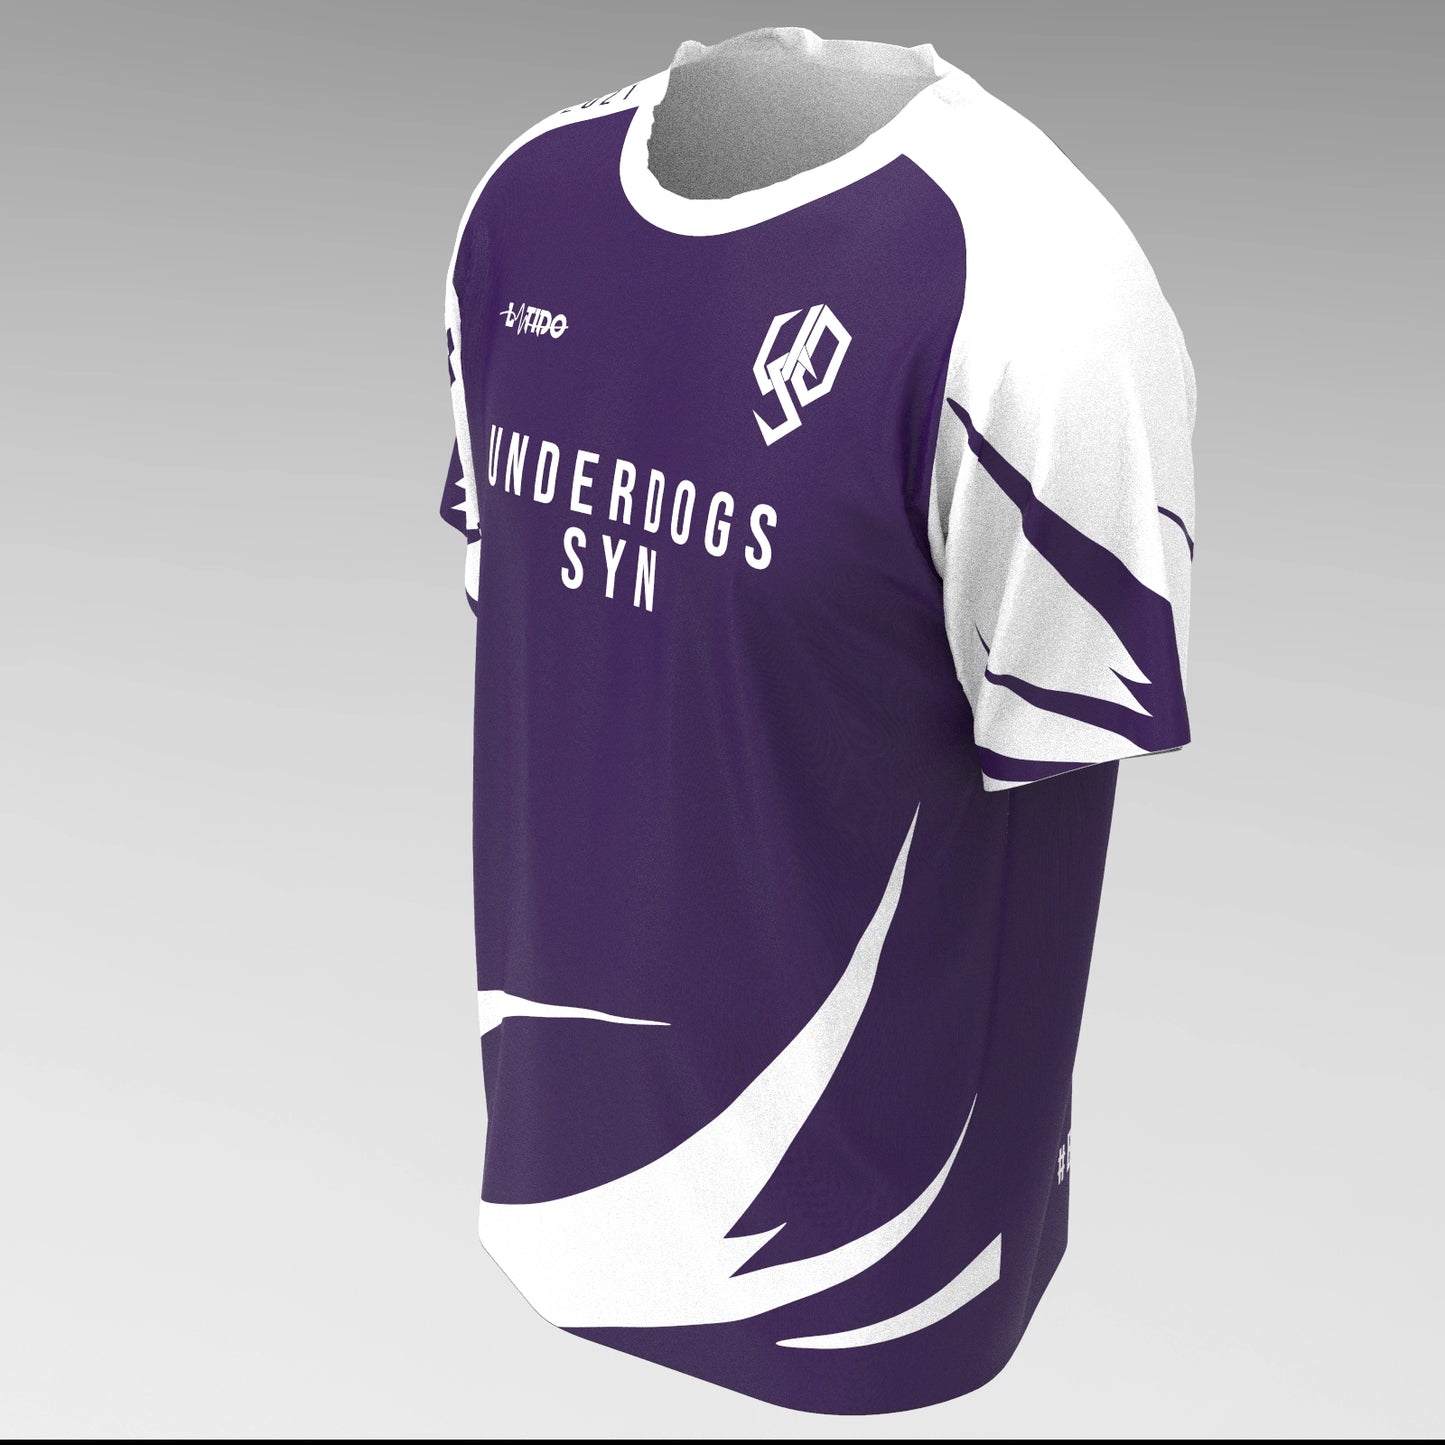 MotionTech Underdogs SYN Jersey